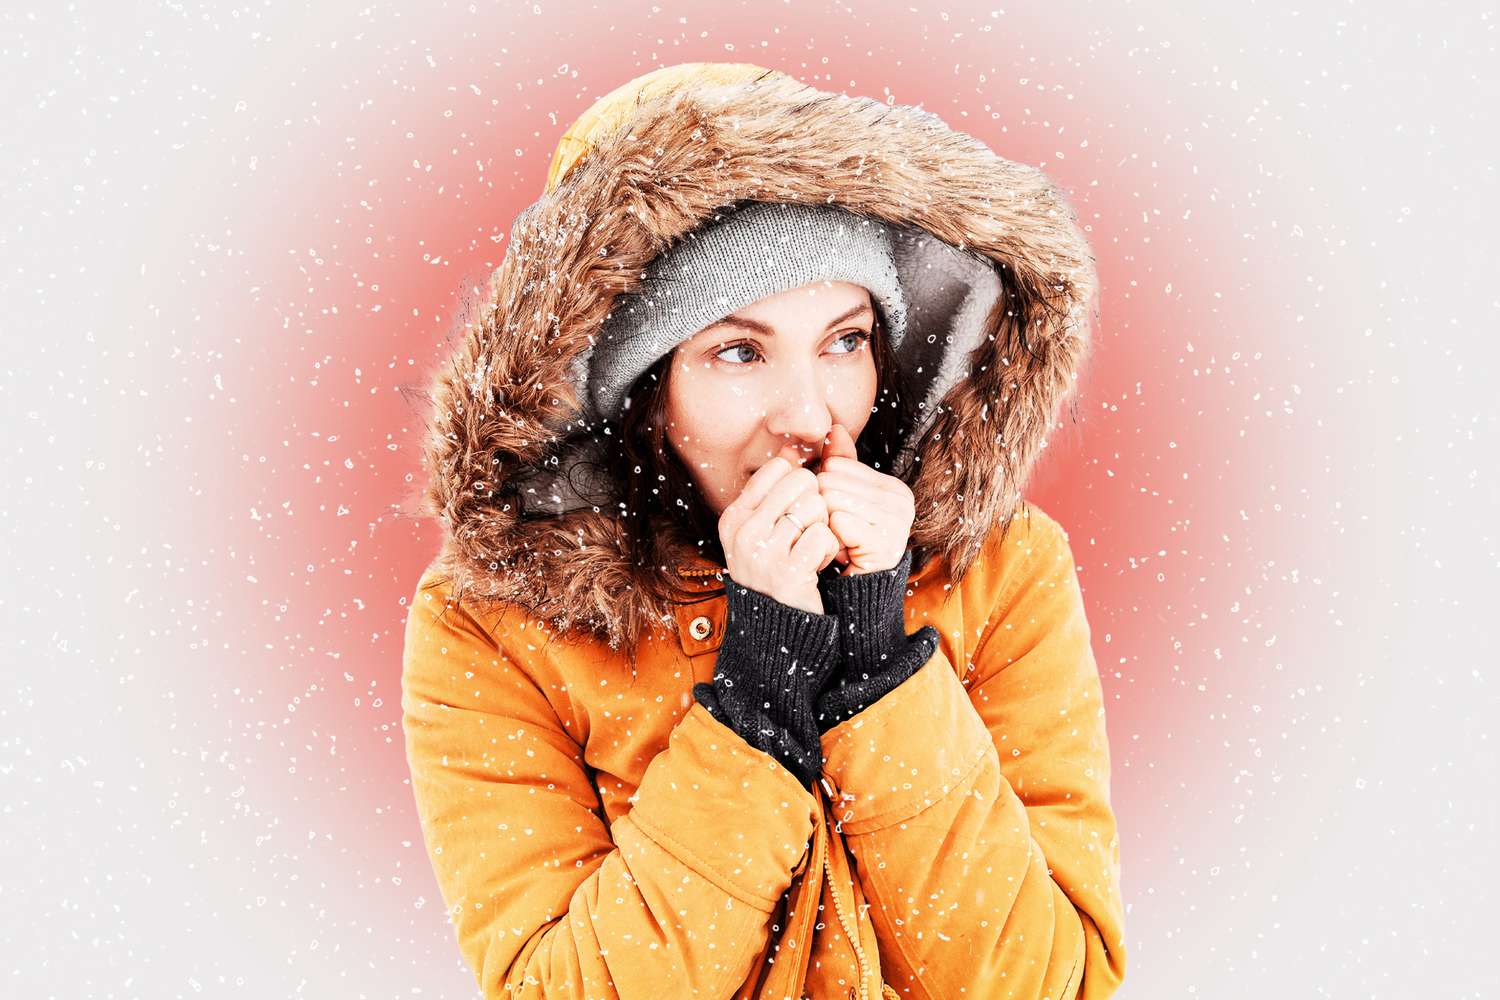 A woman looking cold in a yellow winter jacket. Snow is falling and a red gradient is behind her